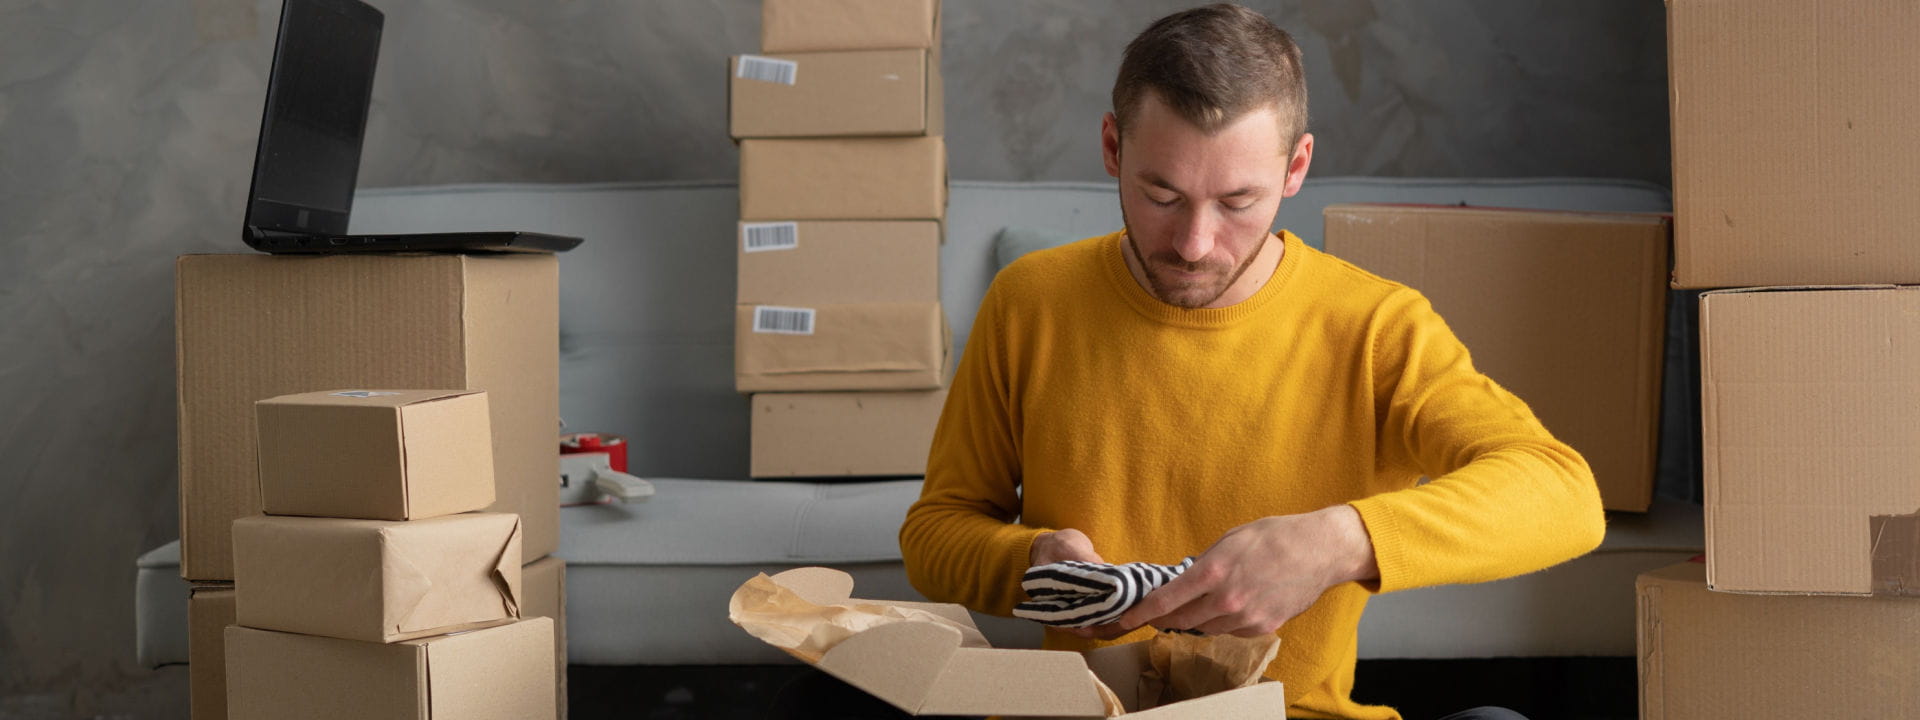 A male ecommerce business owner in a yellow shirt packing boxes for customer orders.